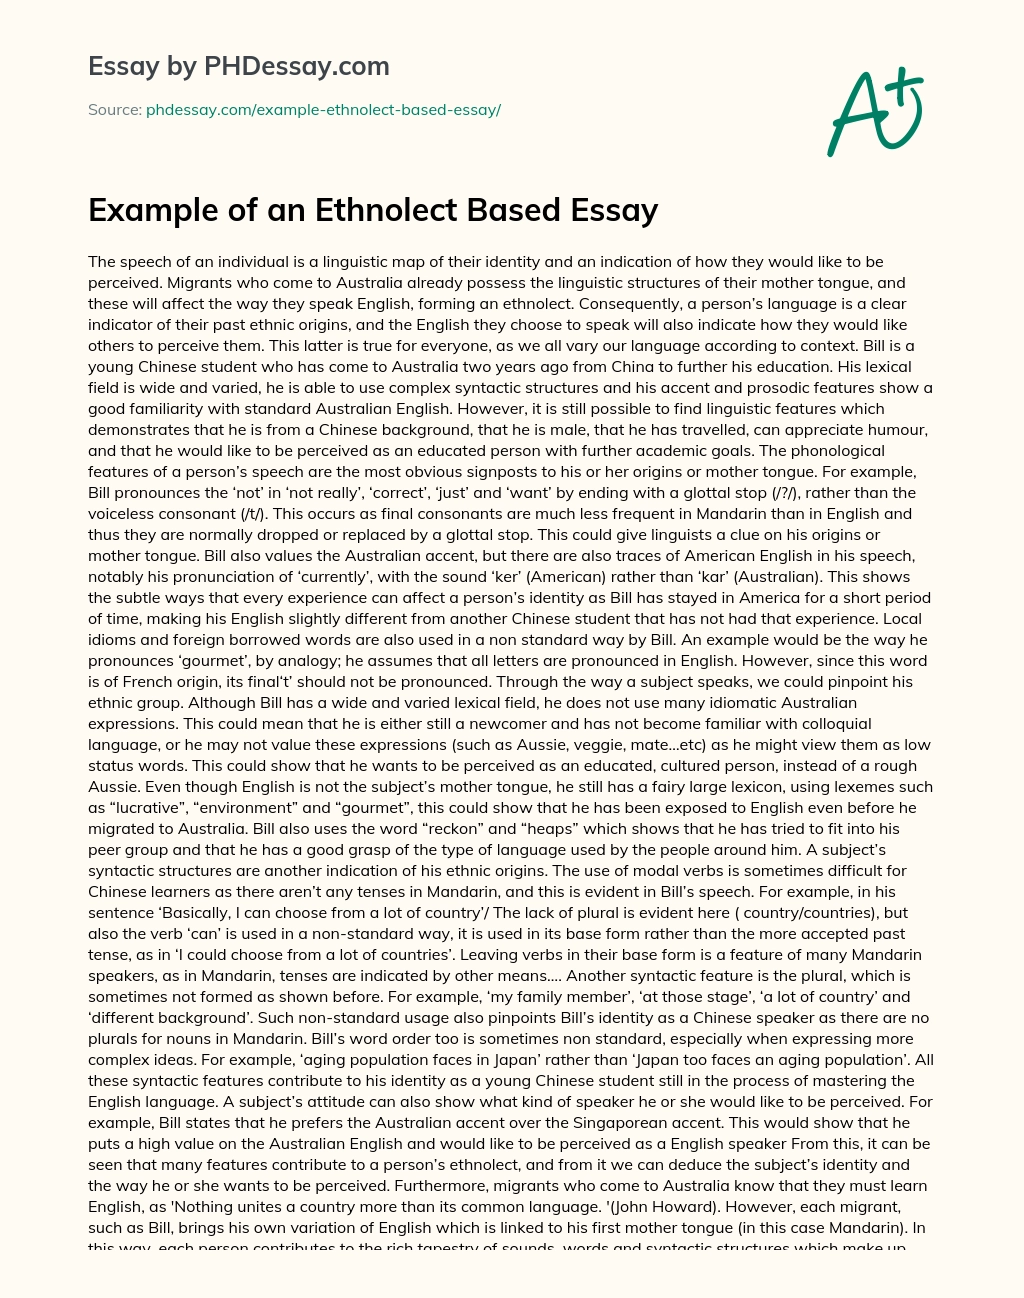 Example of an Ethnolect Based Essay essay